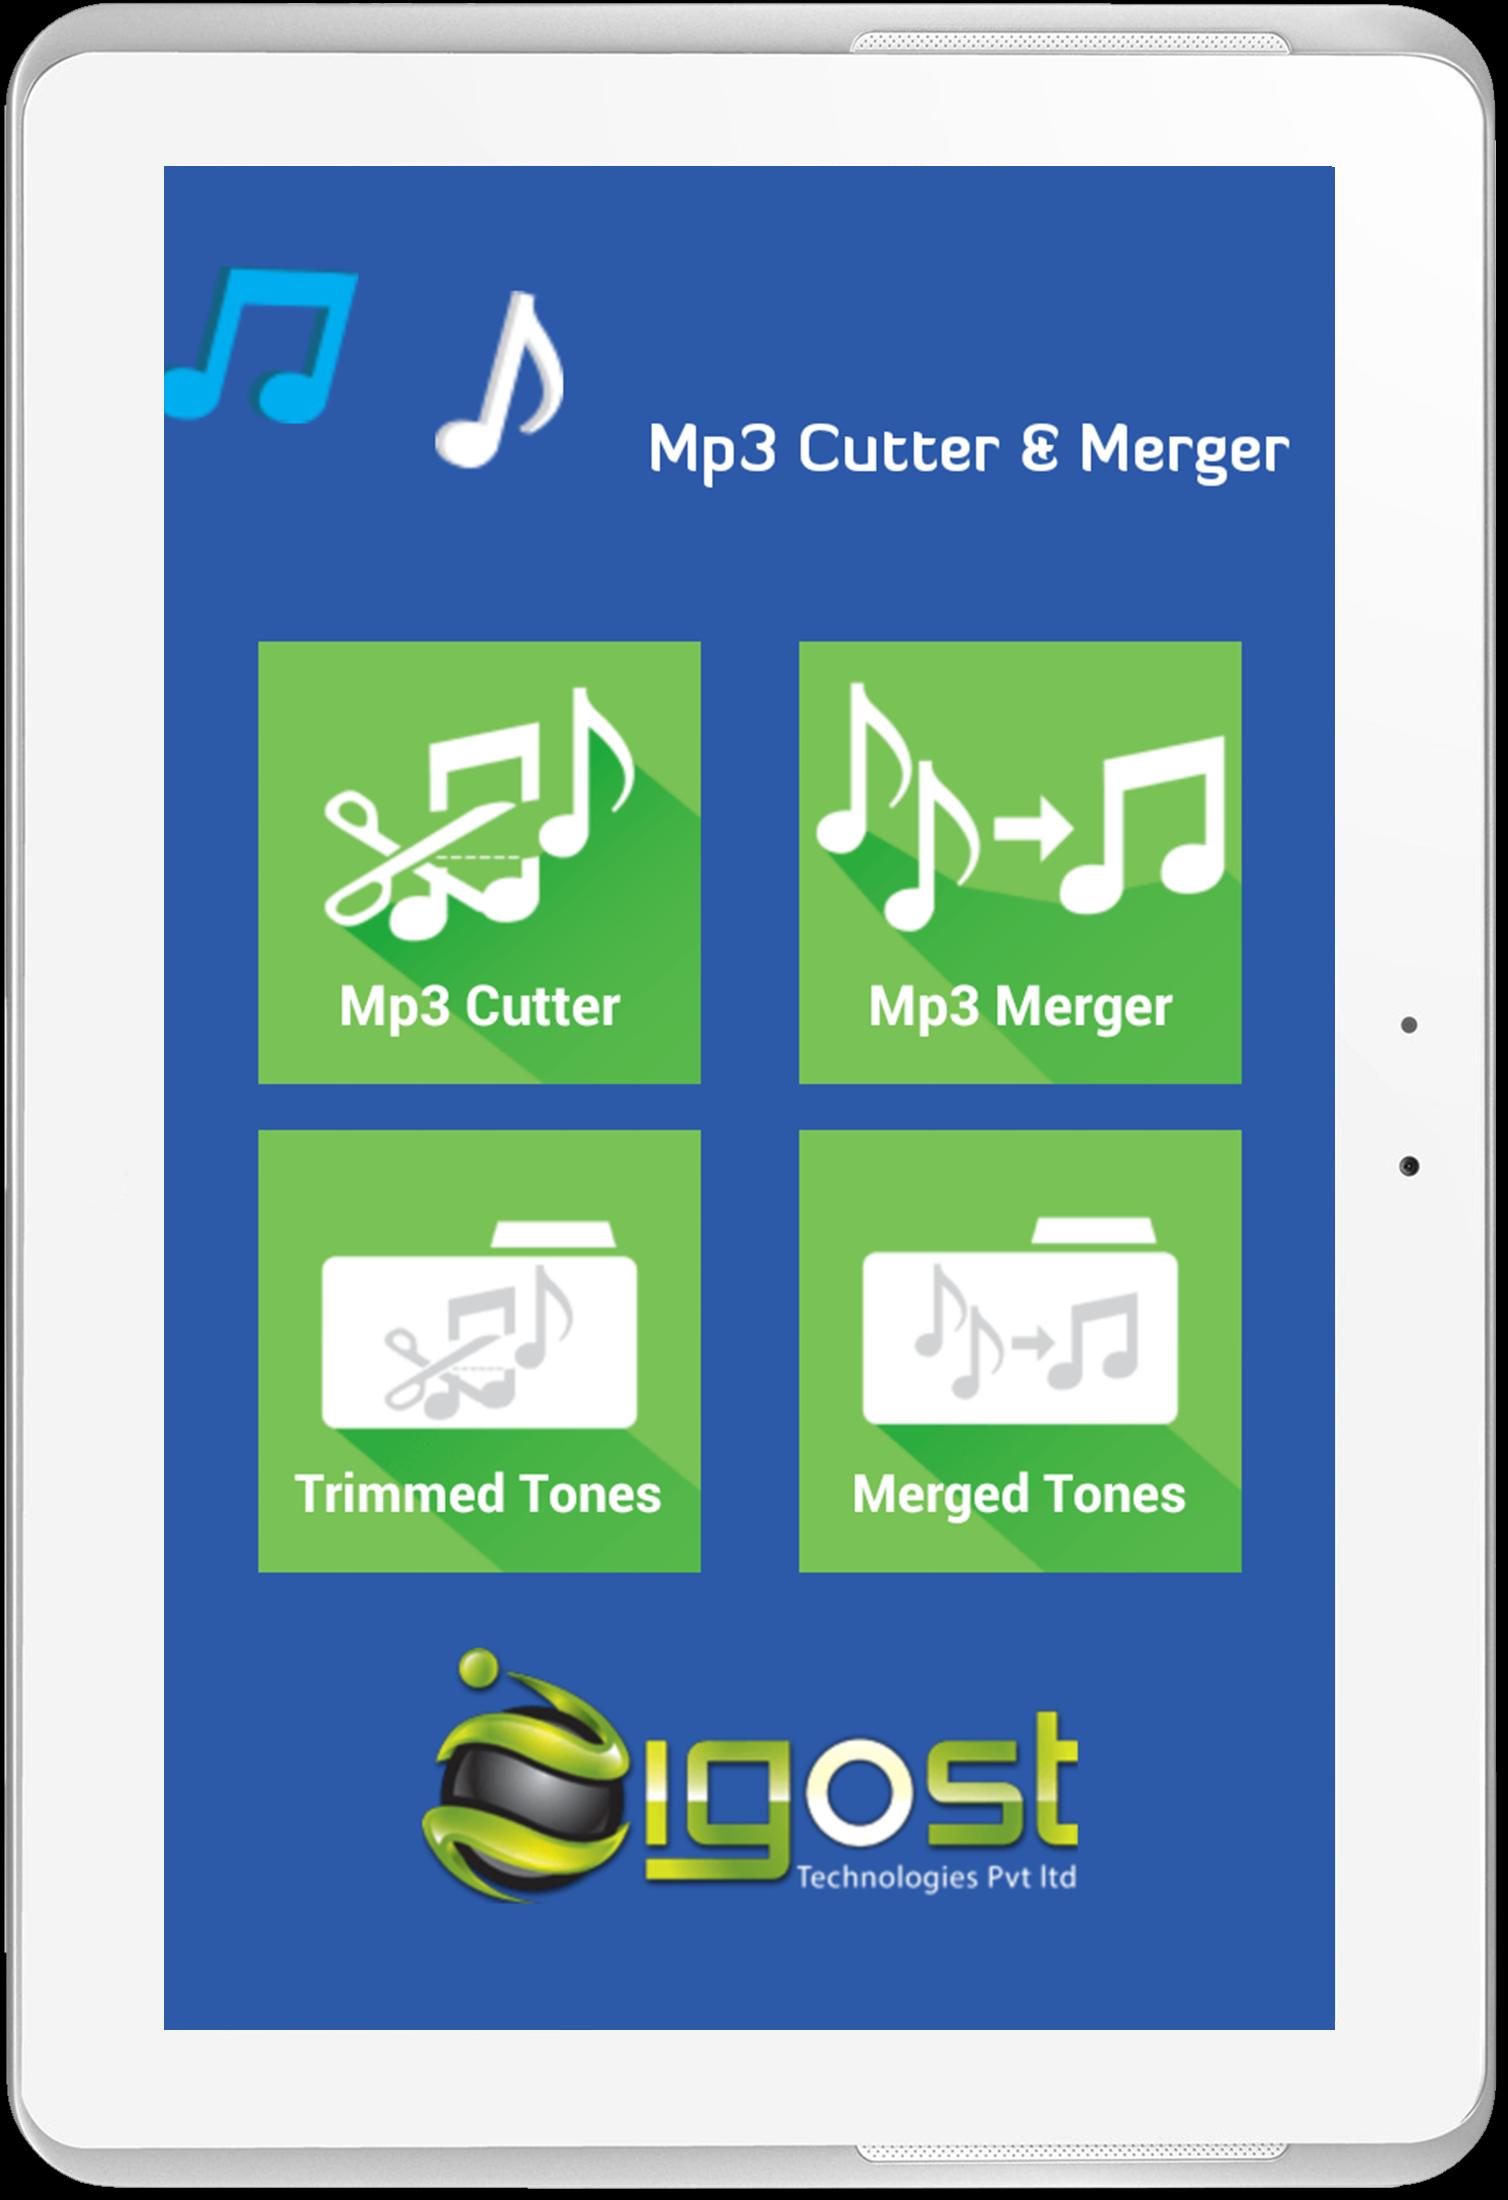 Mp3 Cutter & Merger for Android - APK Download